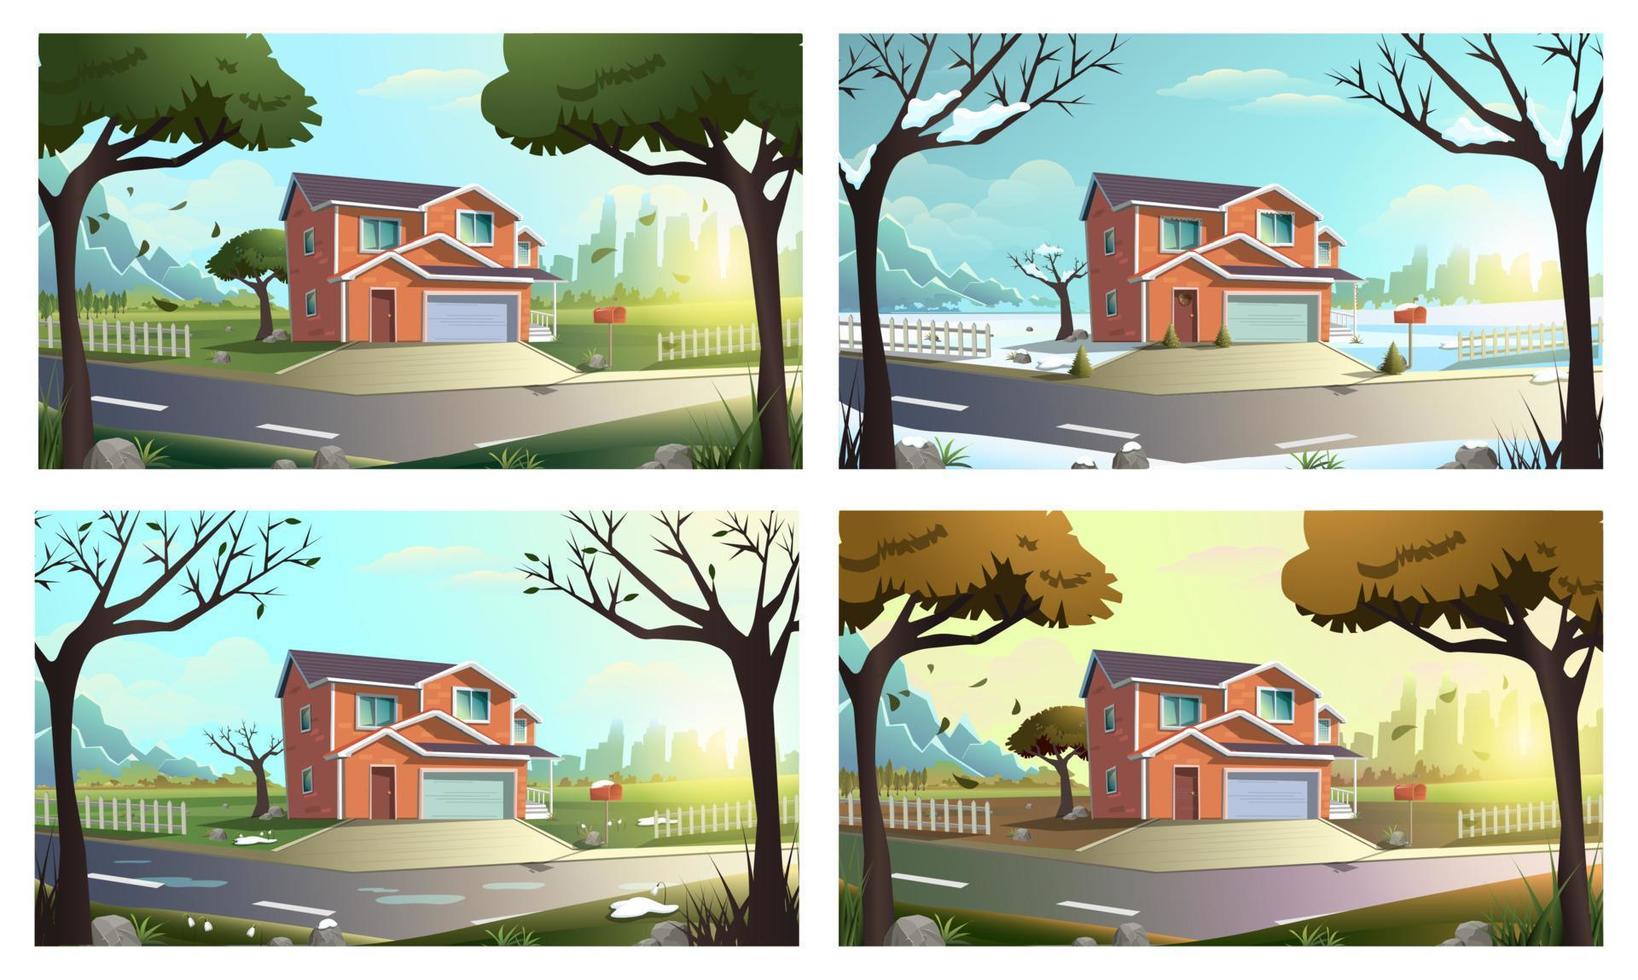 Cartoon vector illustration modern cottage house among trees in the green countryside field outside of the town. in four seasons, winte, spring, summer and autumn.